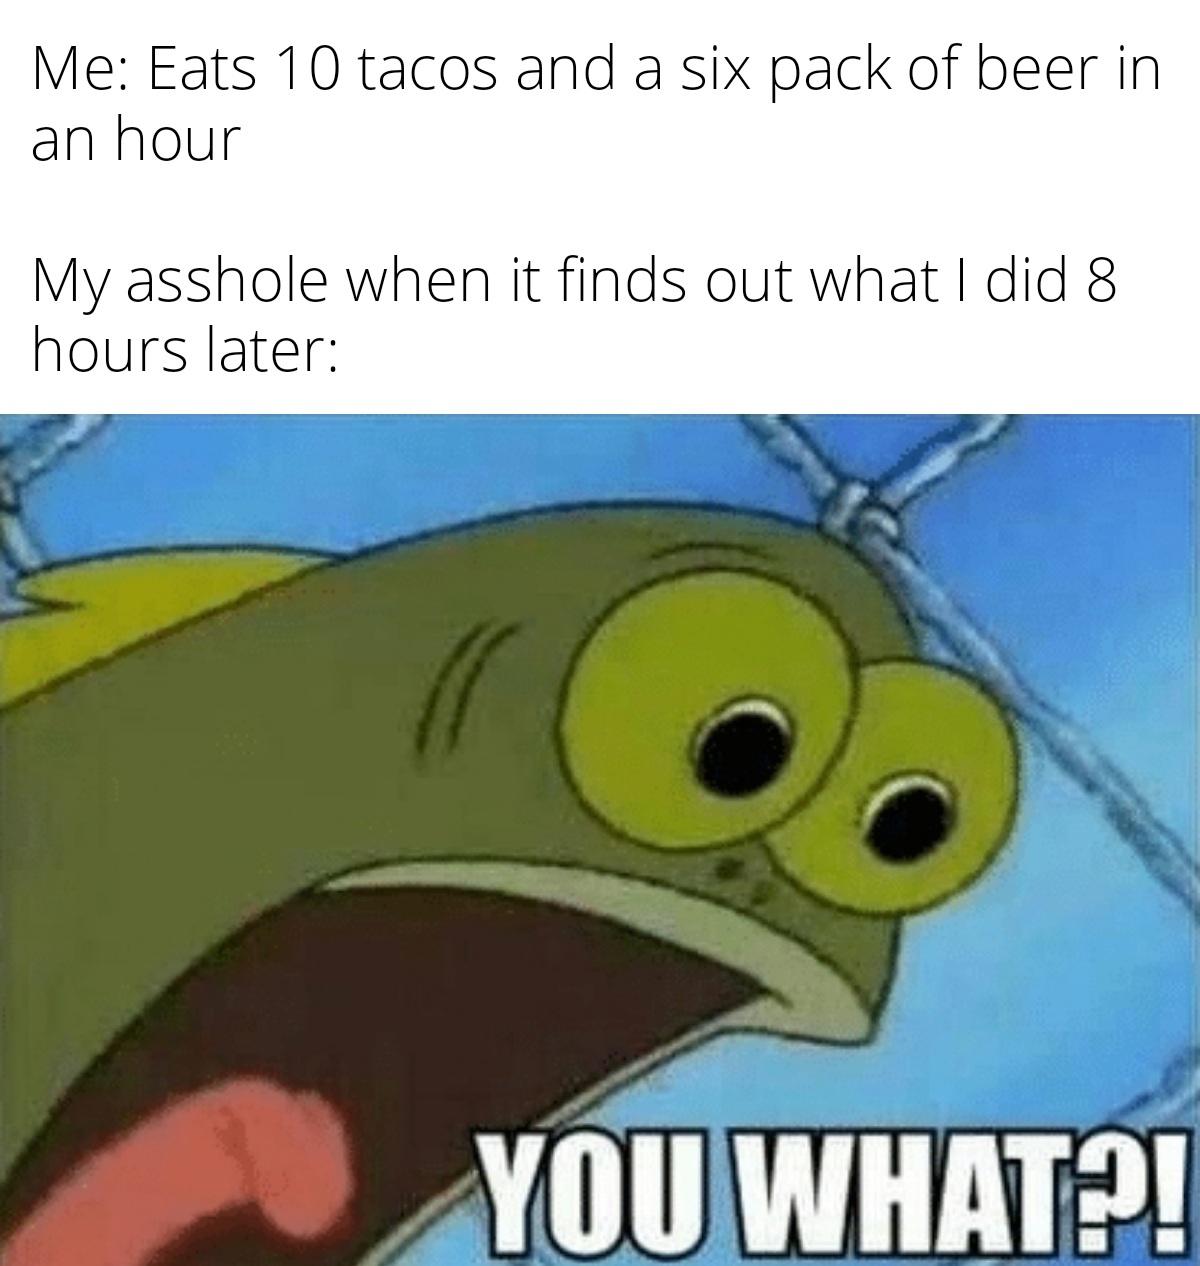 dank memes - funny memes - amazon same day delivery meme - Me Eats 10 tacos and a six pack of beer in an hour My asshole when it finds out what I did 8 hours later You What?!